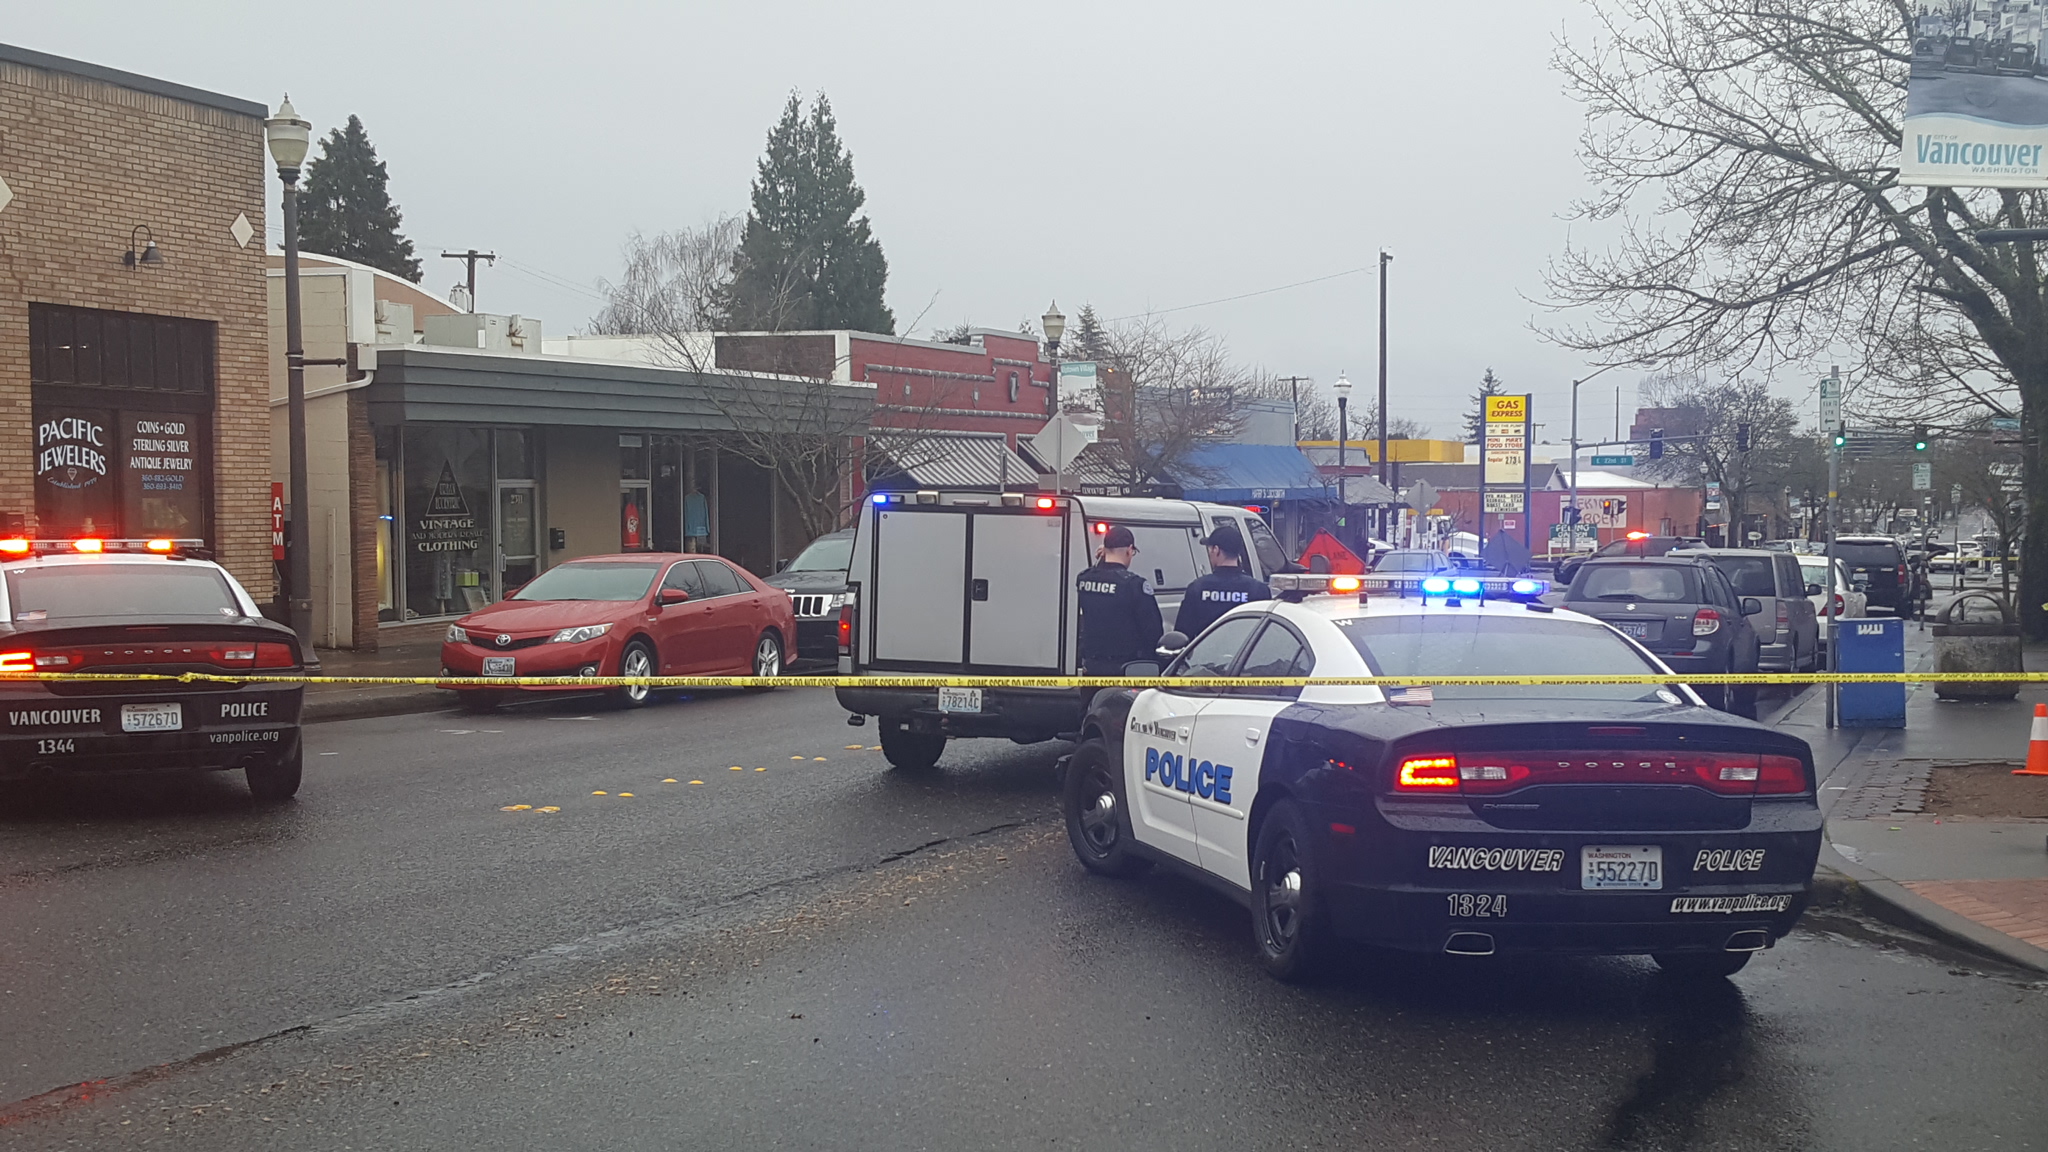 Vancouver police cordon off a section of Main Street in Uptown Village on Saturday while investigating a suspected explosive device found on a sidewalk in the 2300 block of Main Street. The items were later removed by bomb squad personnel.